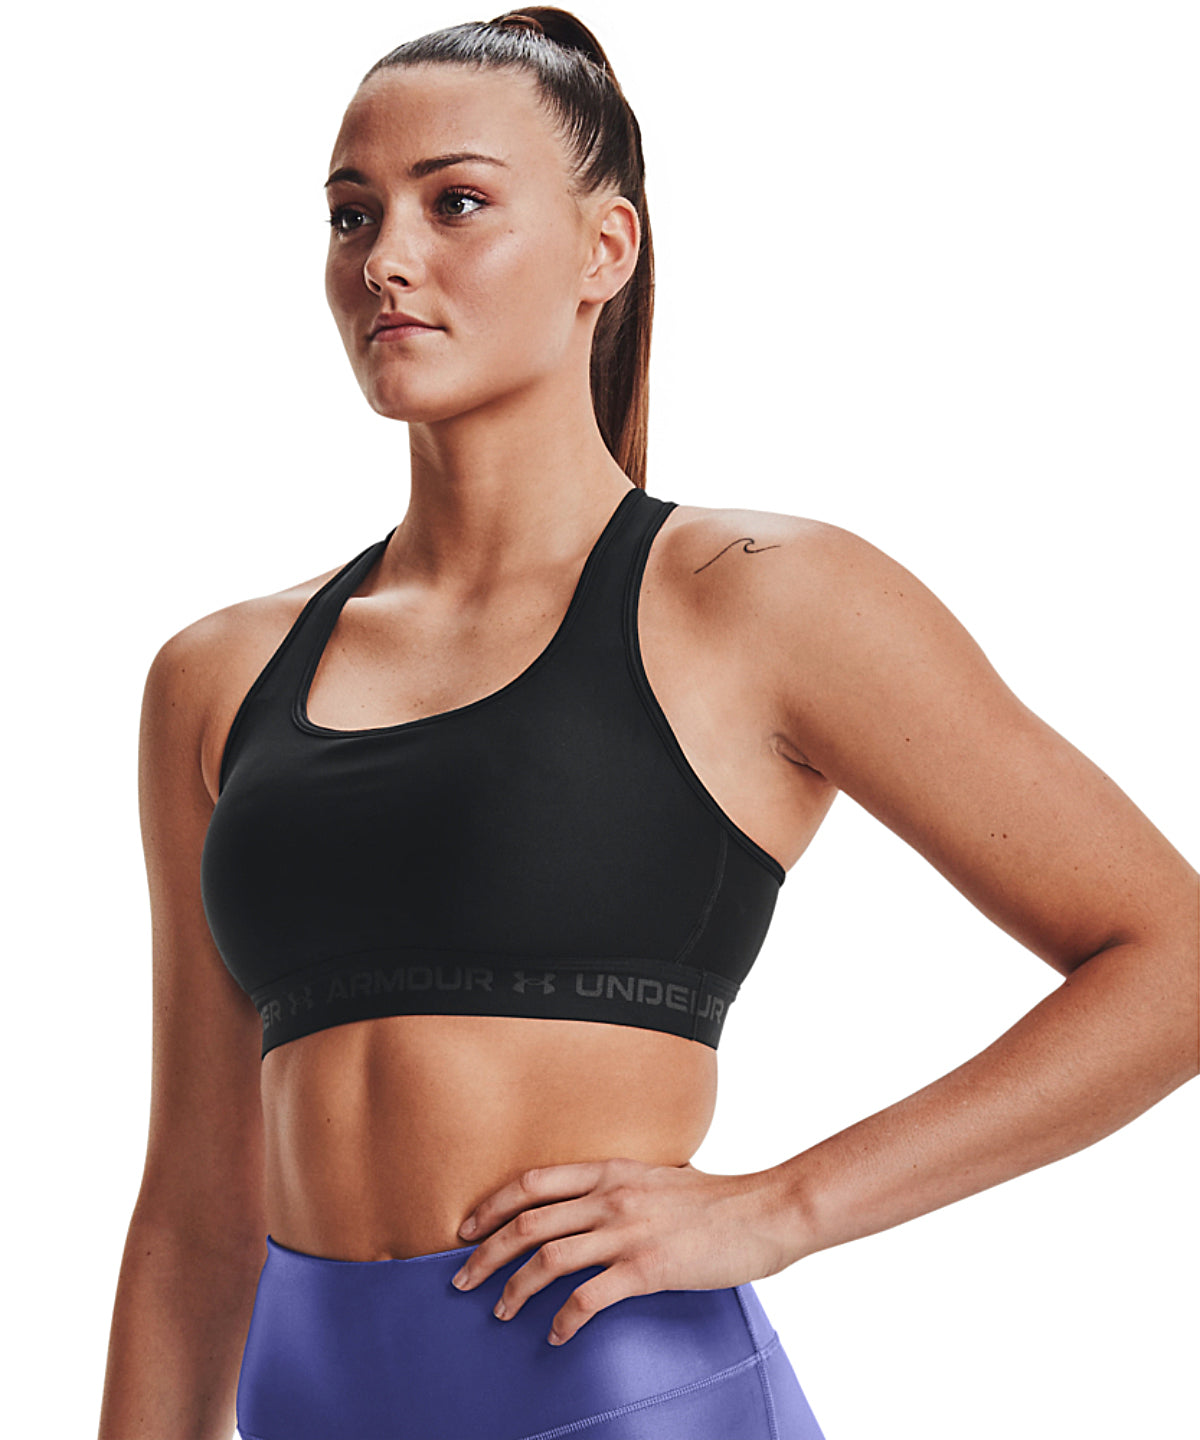 Under Armour Mid Crossback Womens Sports Bra Black Compression Removable Cups - Hamtons Direct